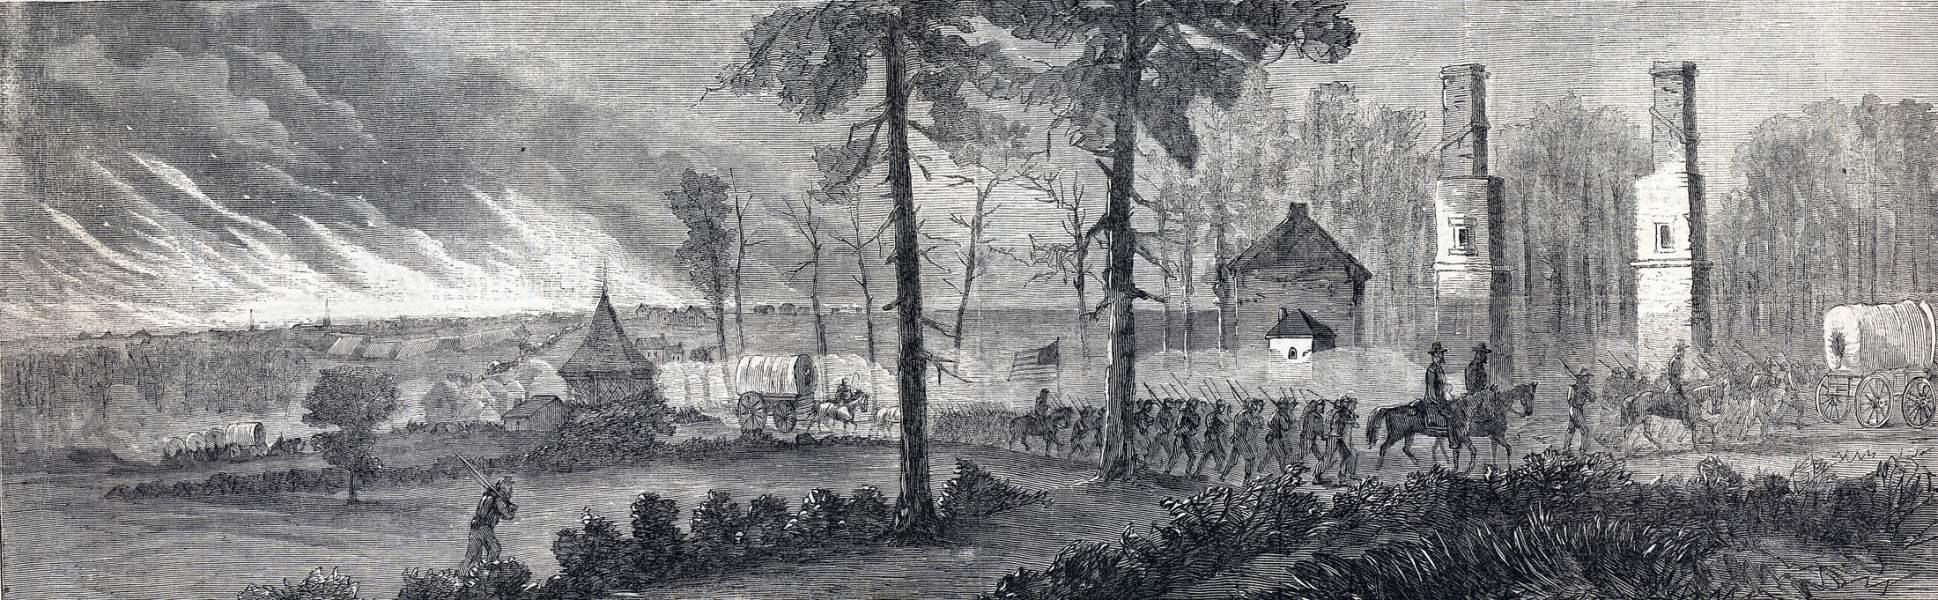 Union troops move out from a burning Atlanta, Georgia, November 15, 1864, artist's impression, zoomable image